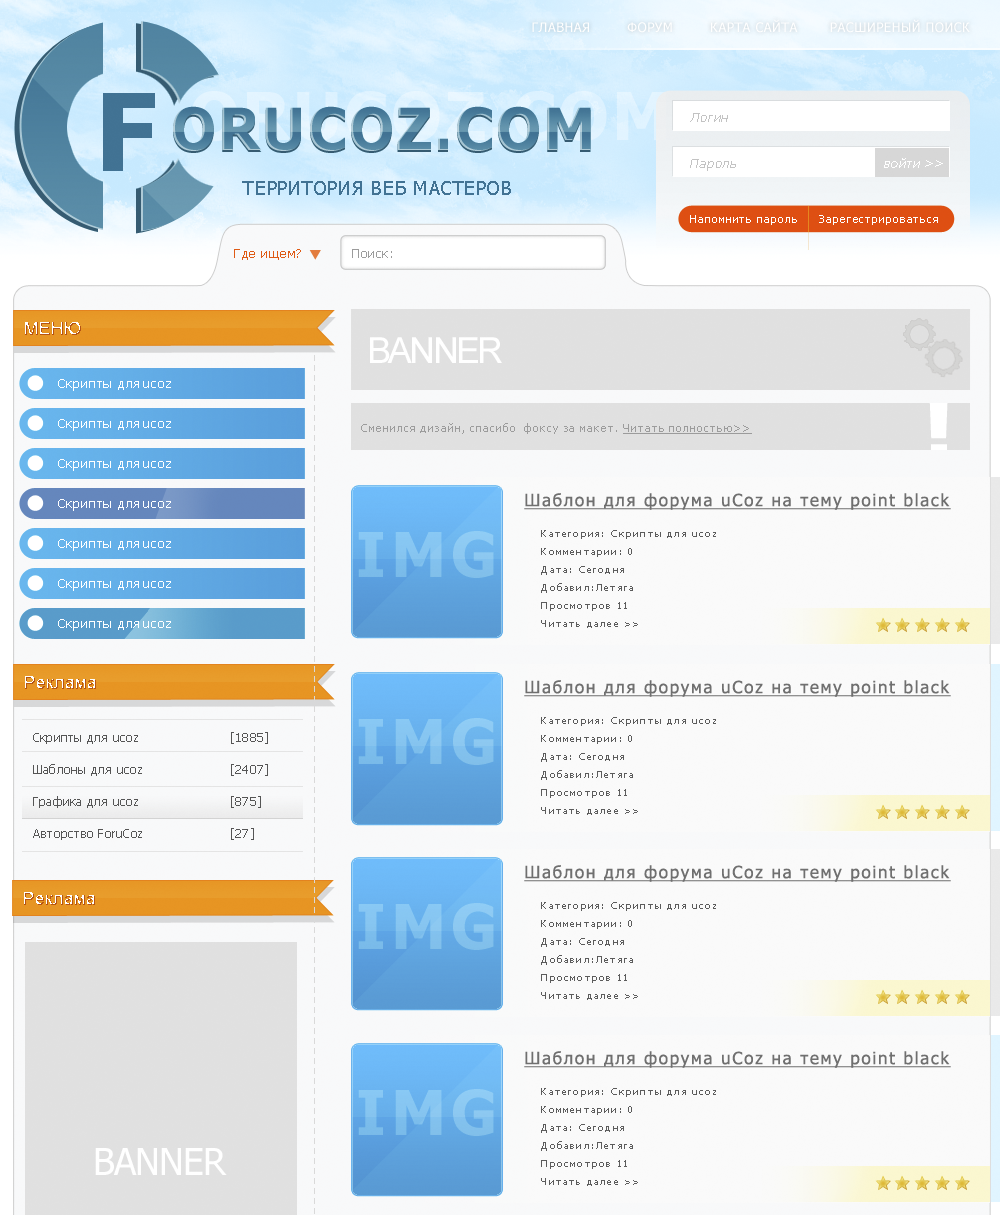 Forucoz old